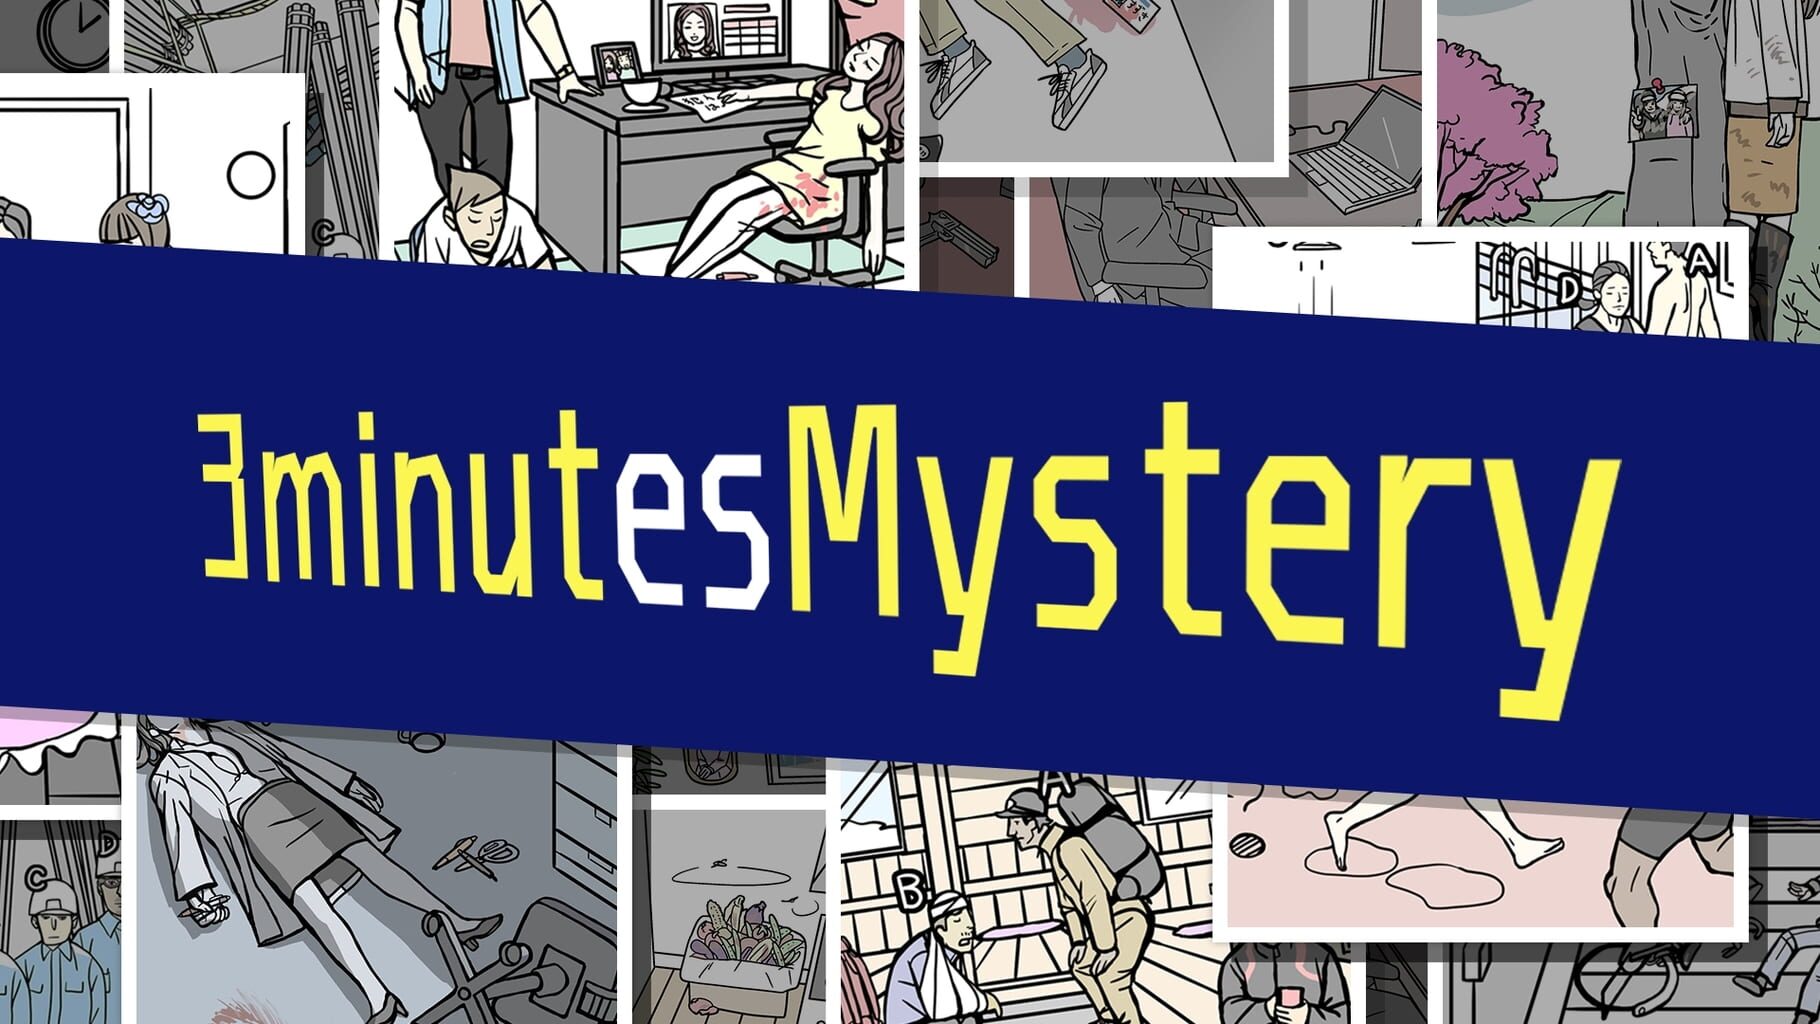 3 Minutes Mystery artwork